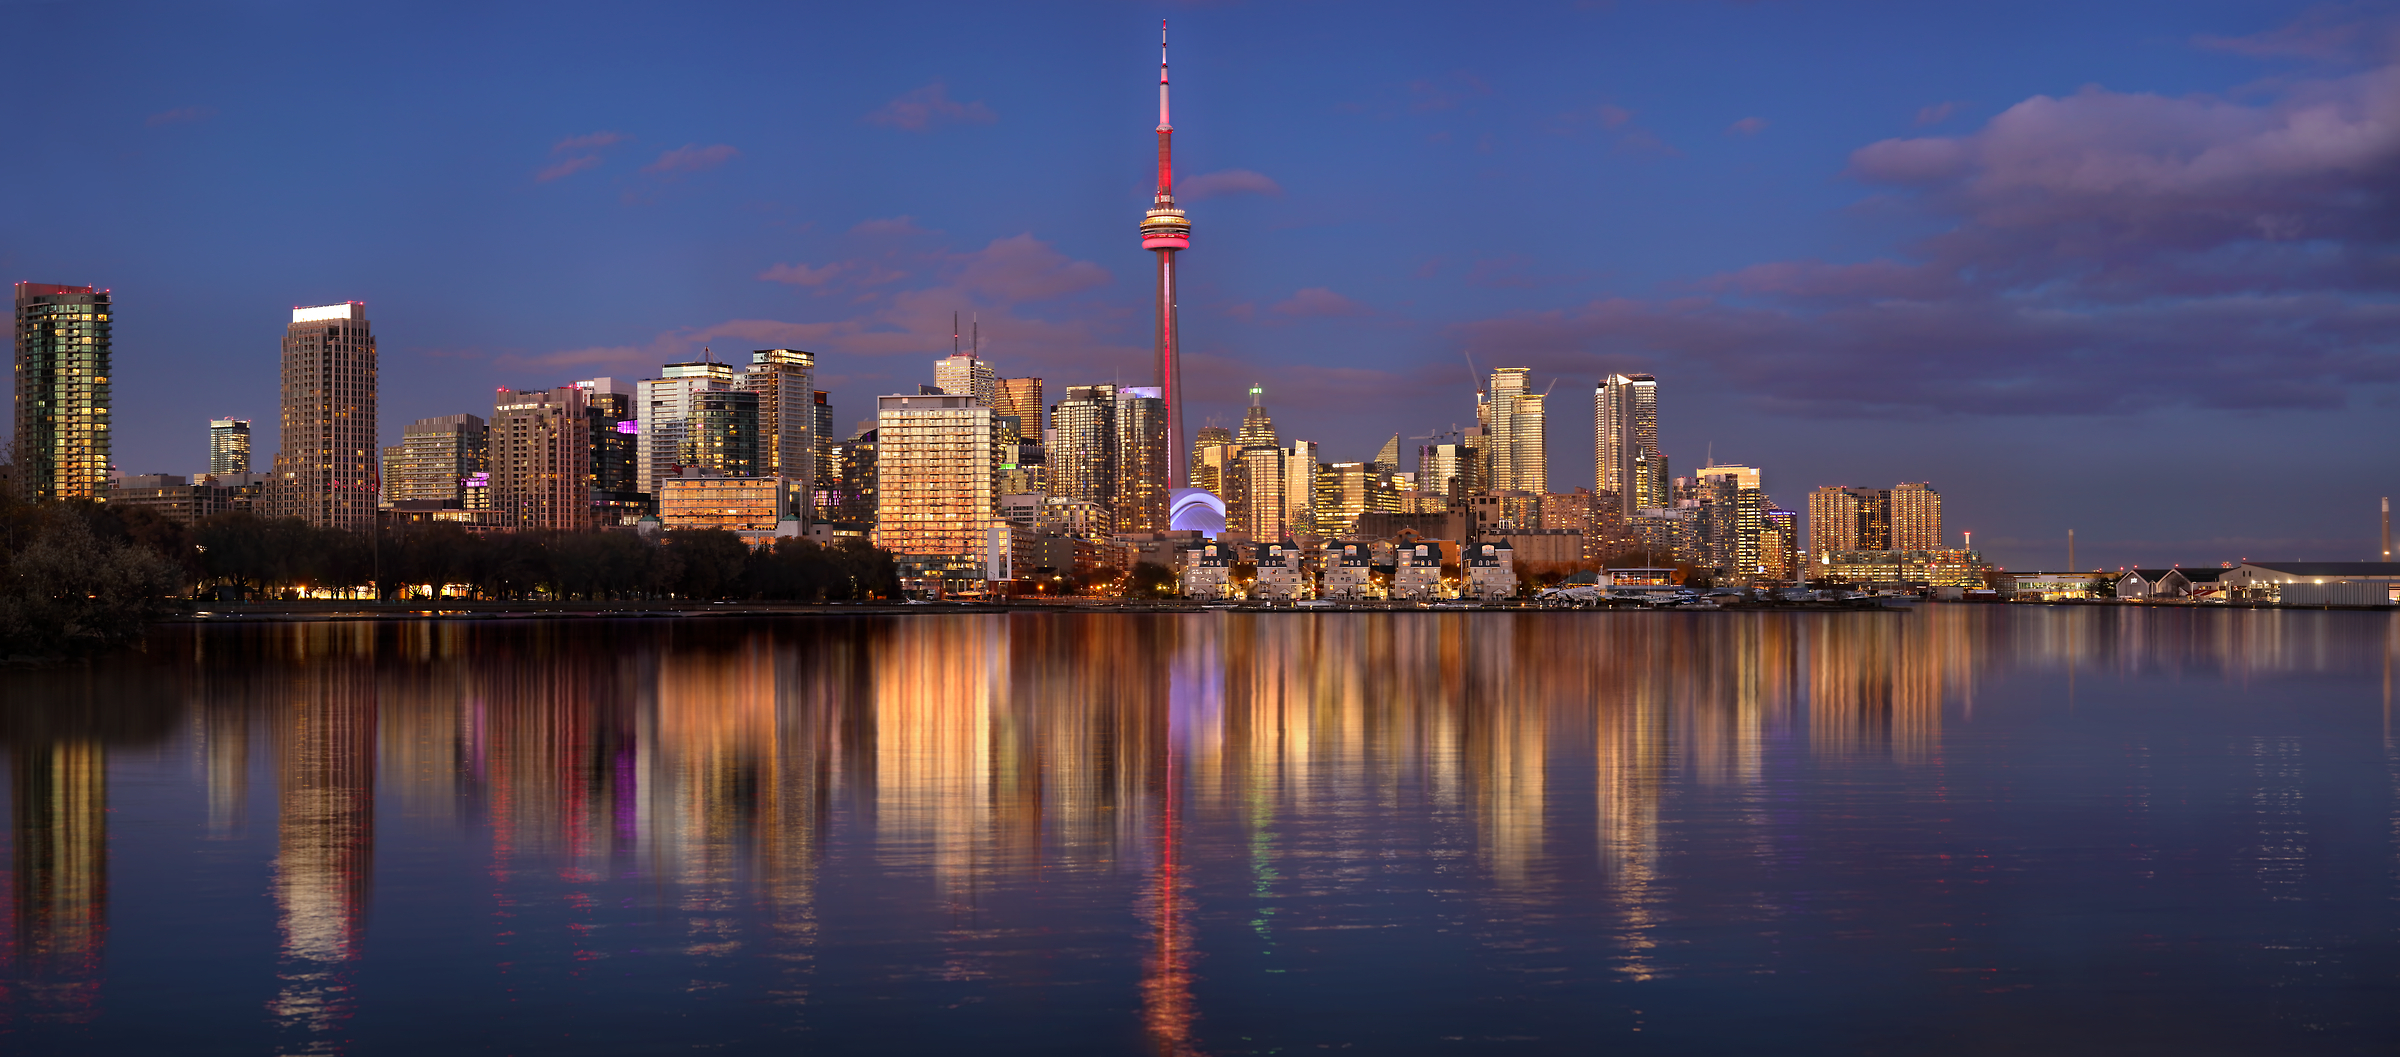 533 megapixels! A very high resolution, large-format VAST photo print of the Toronto skyline at dusk with Lake Ontario in the foreground; cityscape photograph created by Phil Crawshay in Downtown Toronto, Ontario, Canada